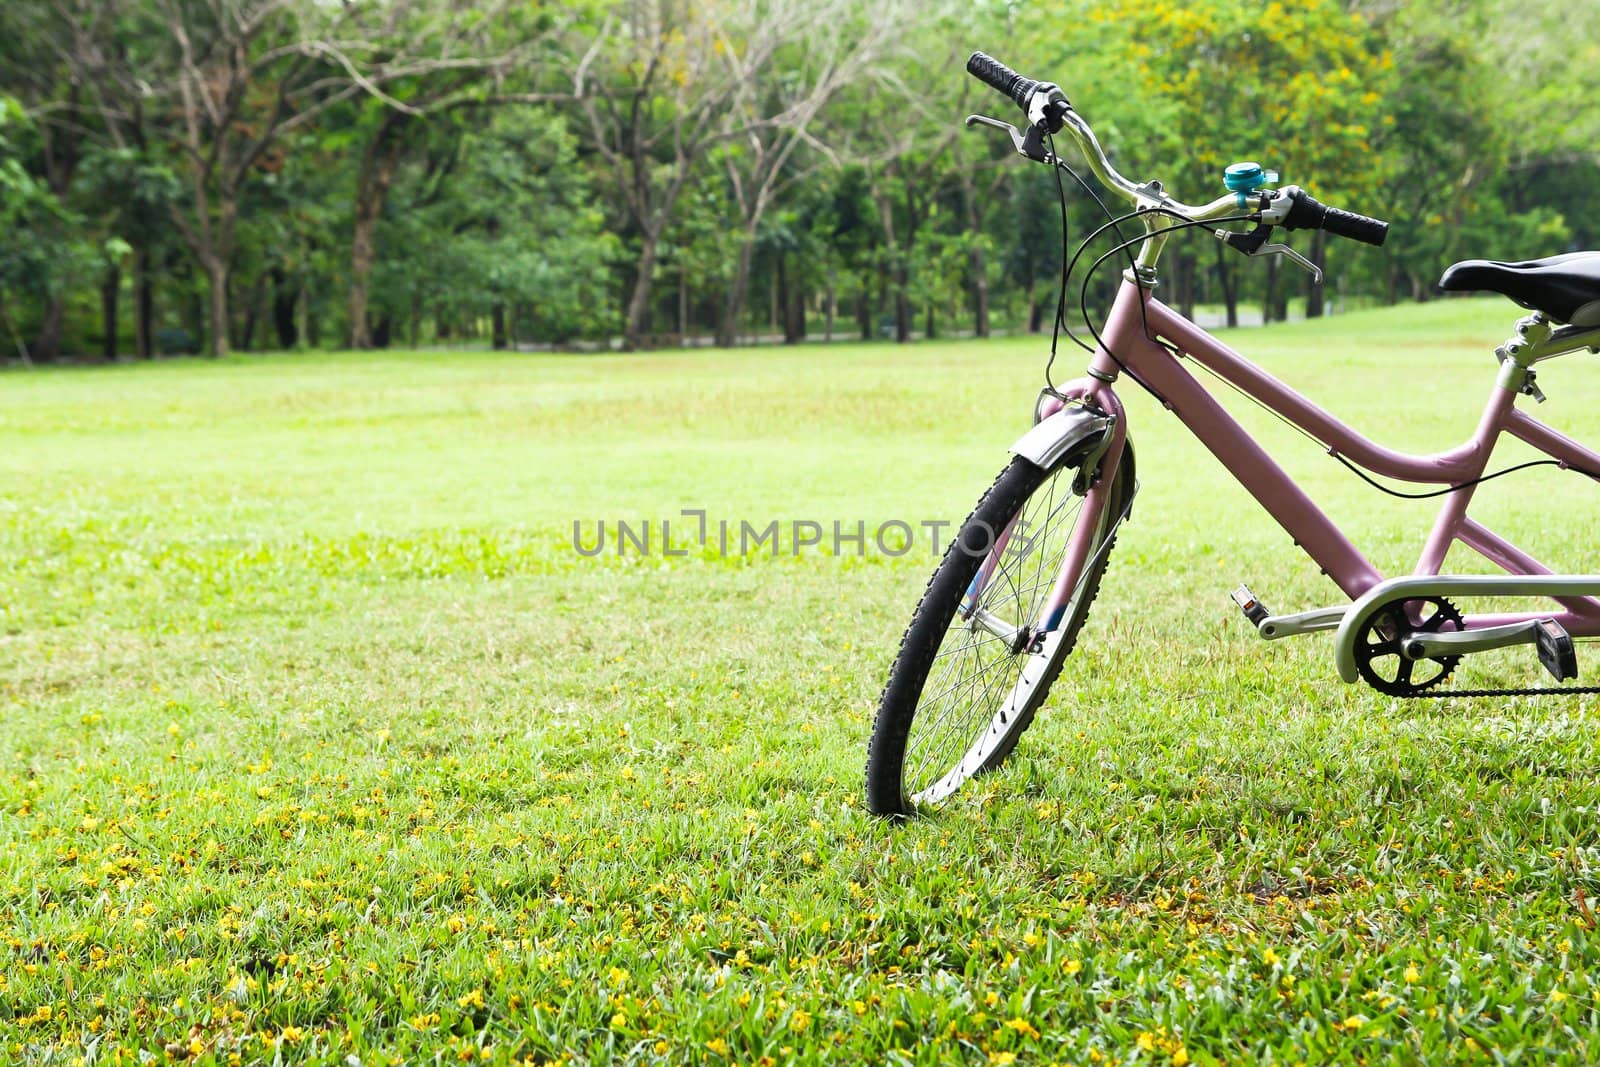 Bicycle in the park by Myimagine